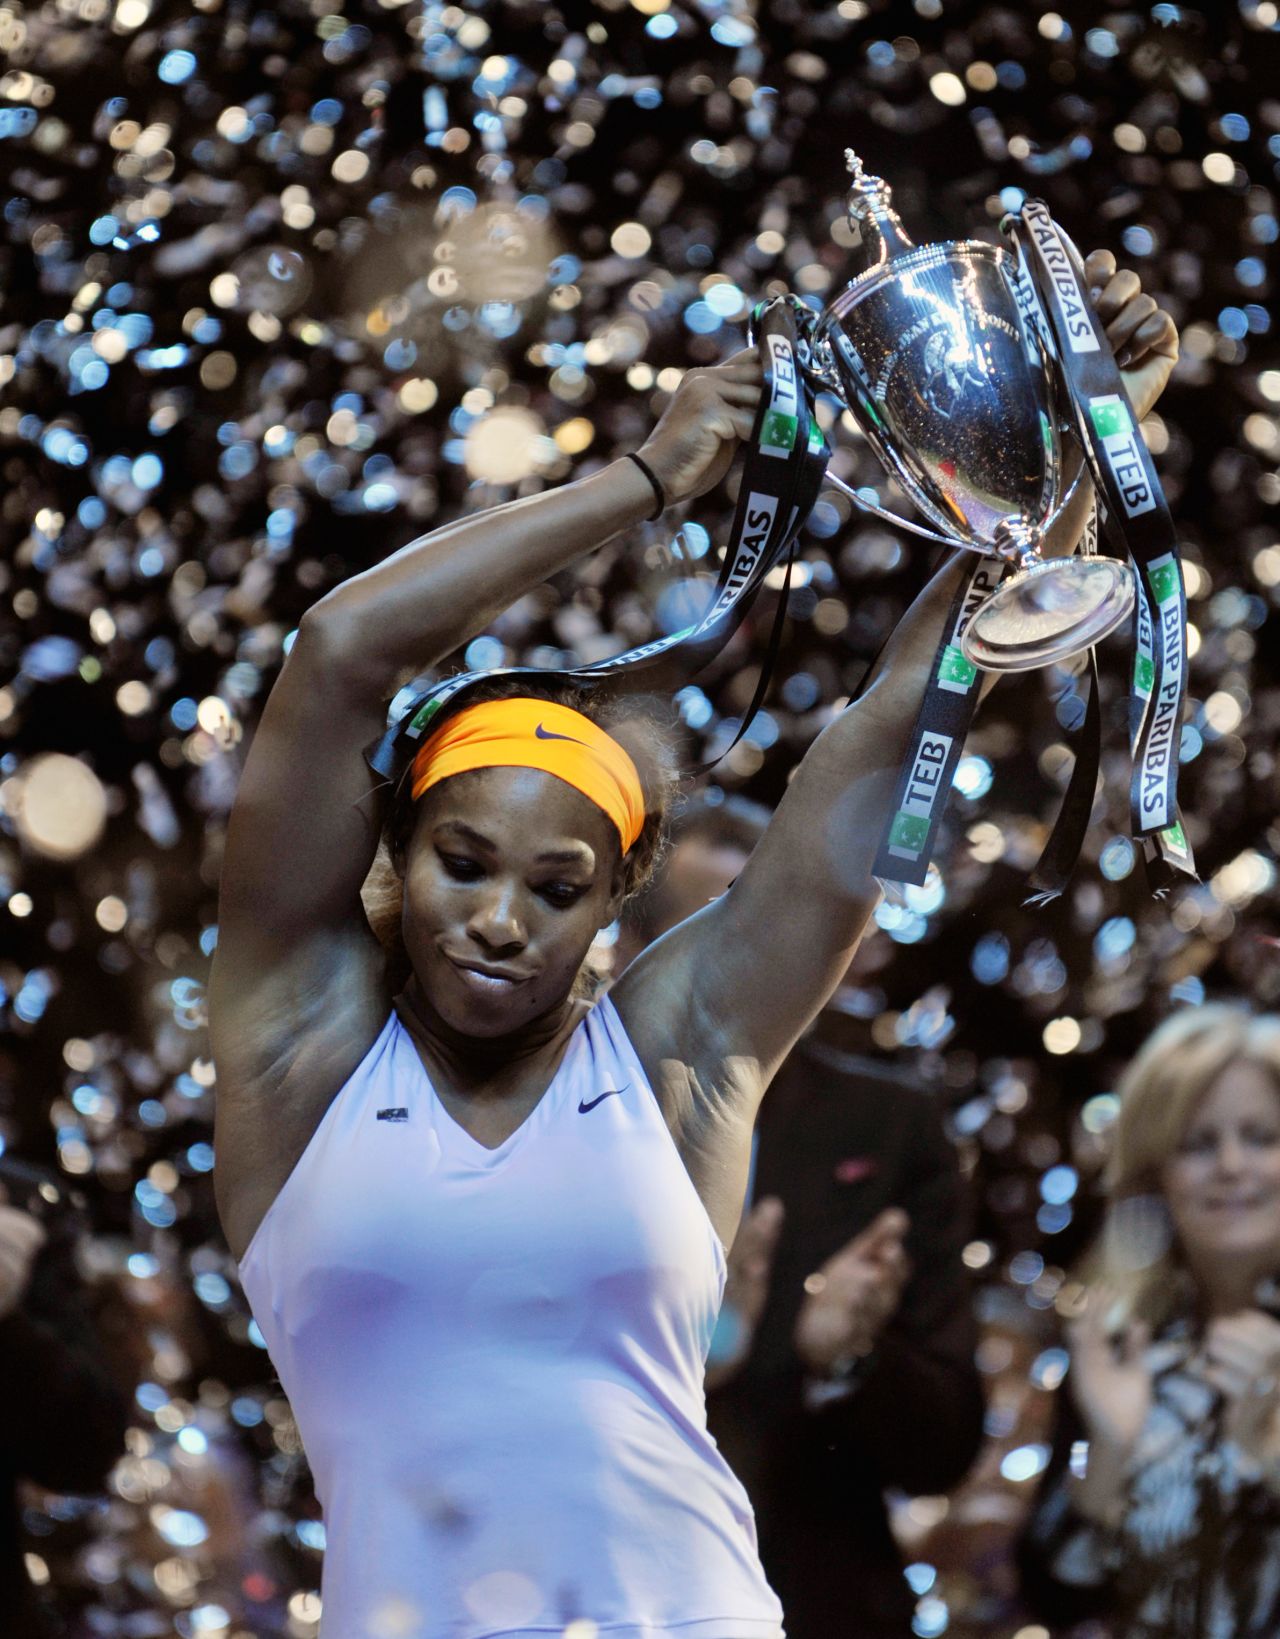 The American enjoyed her best year in 2013, capped with a successful defense of her season-ending WTA Championships crown. She won 11 titles, including the French and U.S. Open trophies, and finished the year with 78 wins and just four defeats.